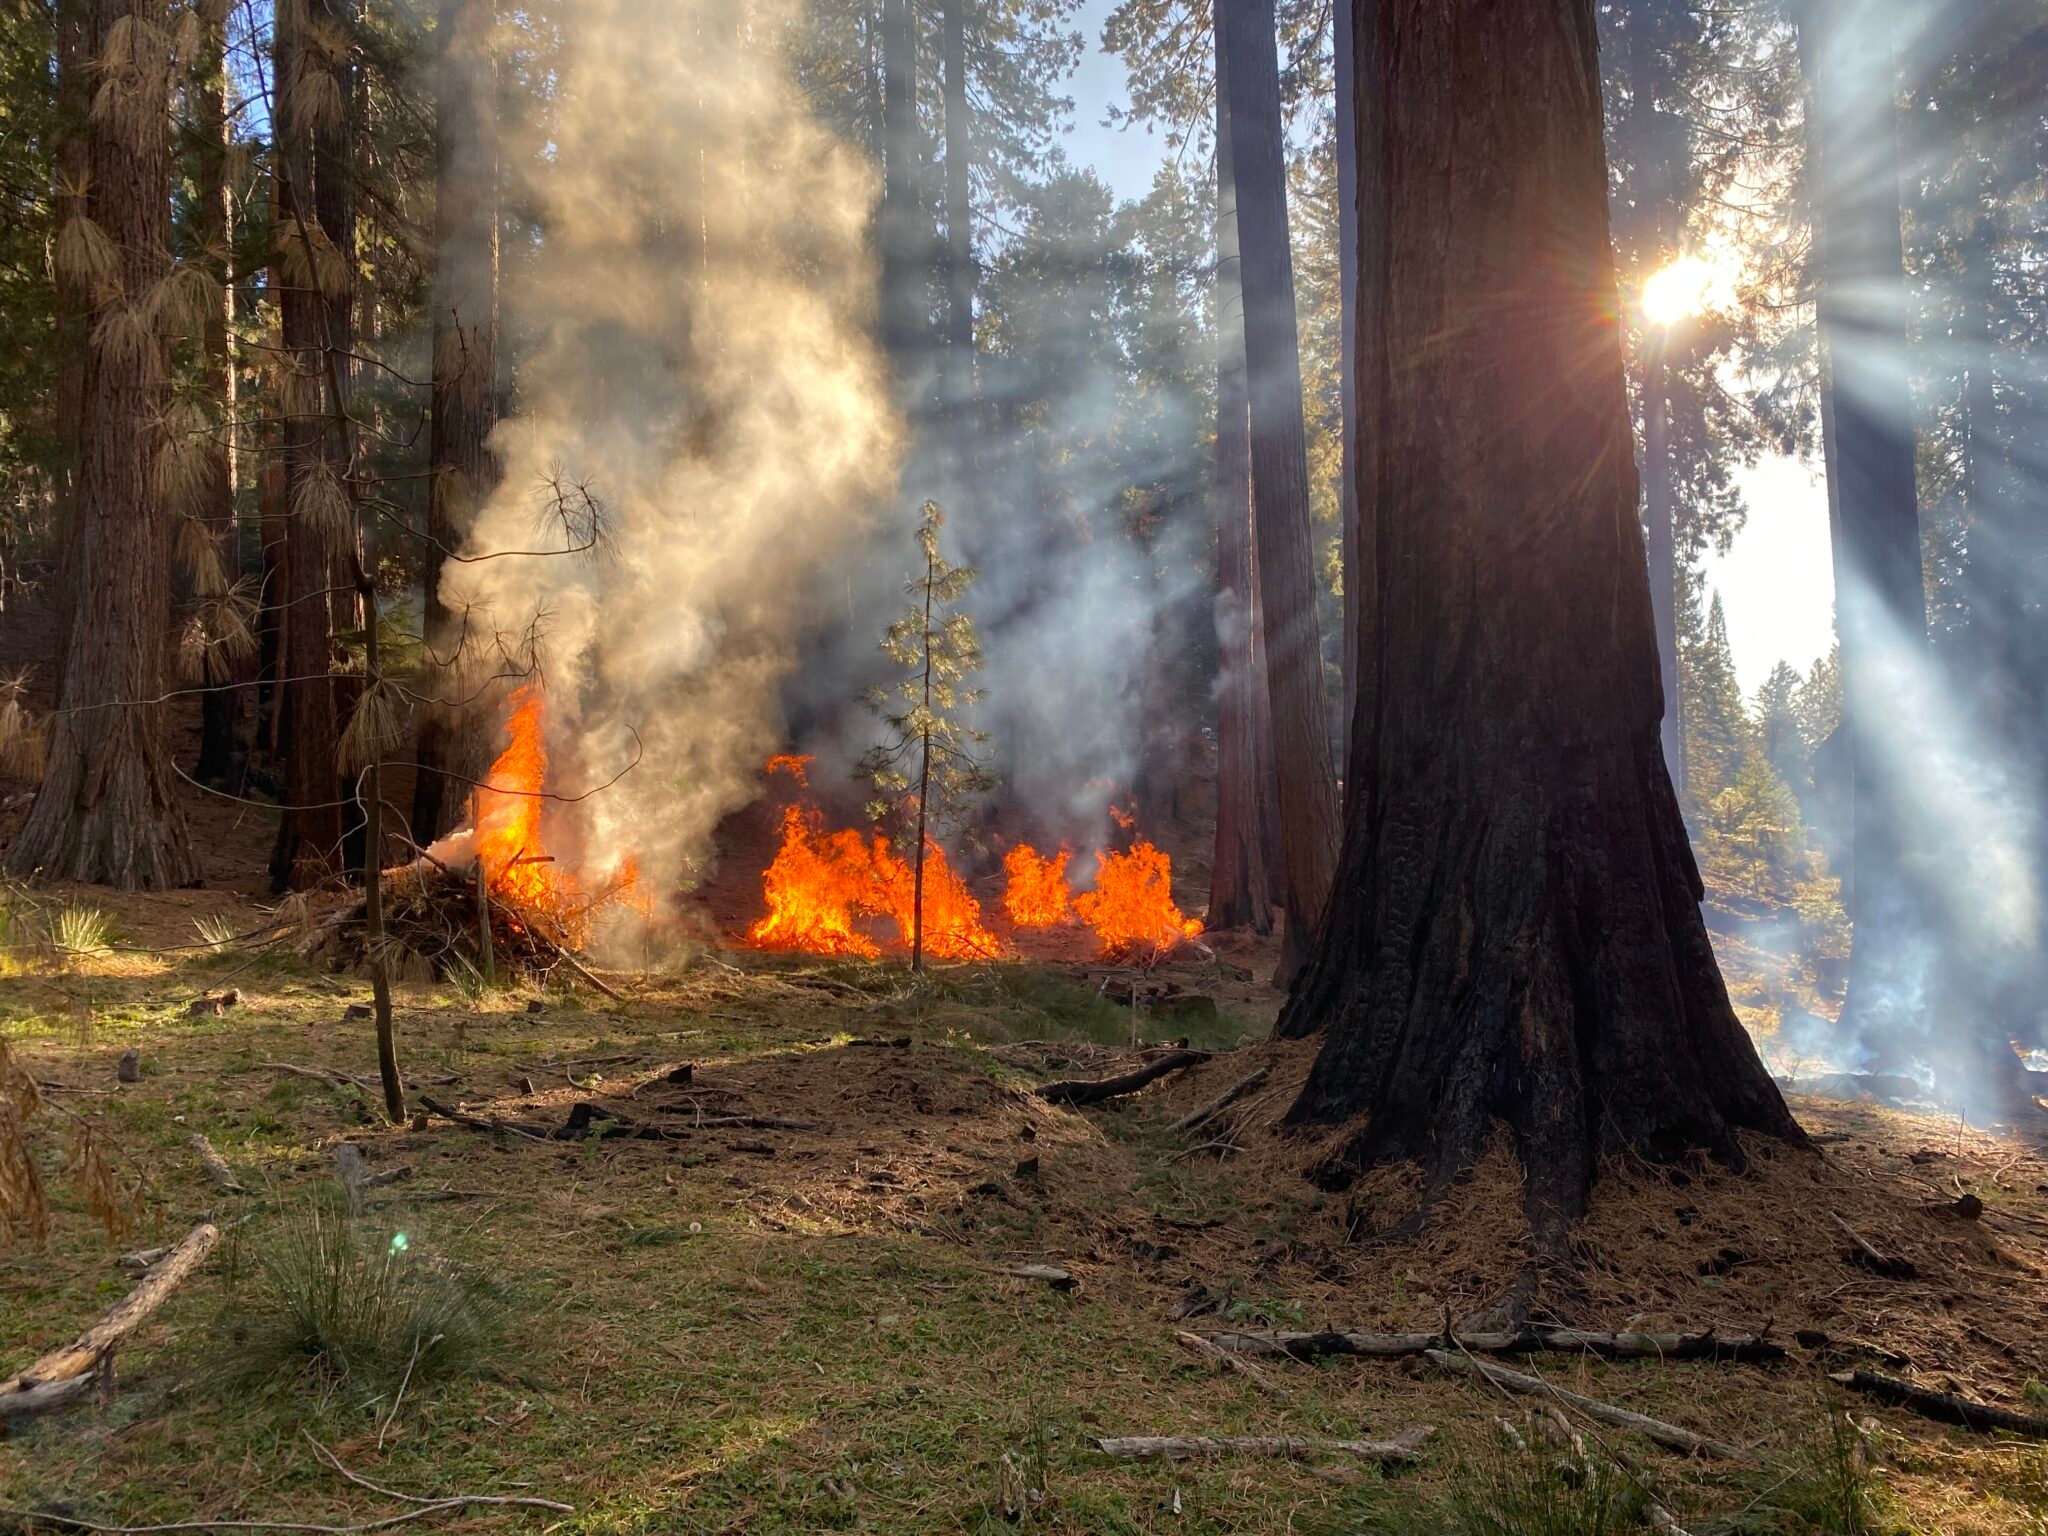 Pile burning in Whitaker’s Research Forest within Redwood Mountain Grove. Photo by Rob York, University of California, Berkeley